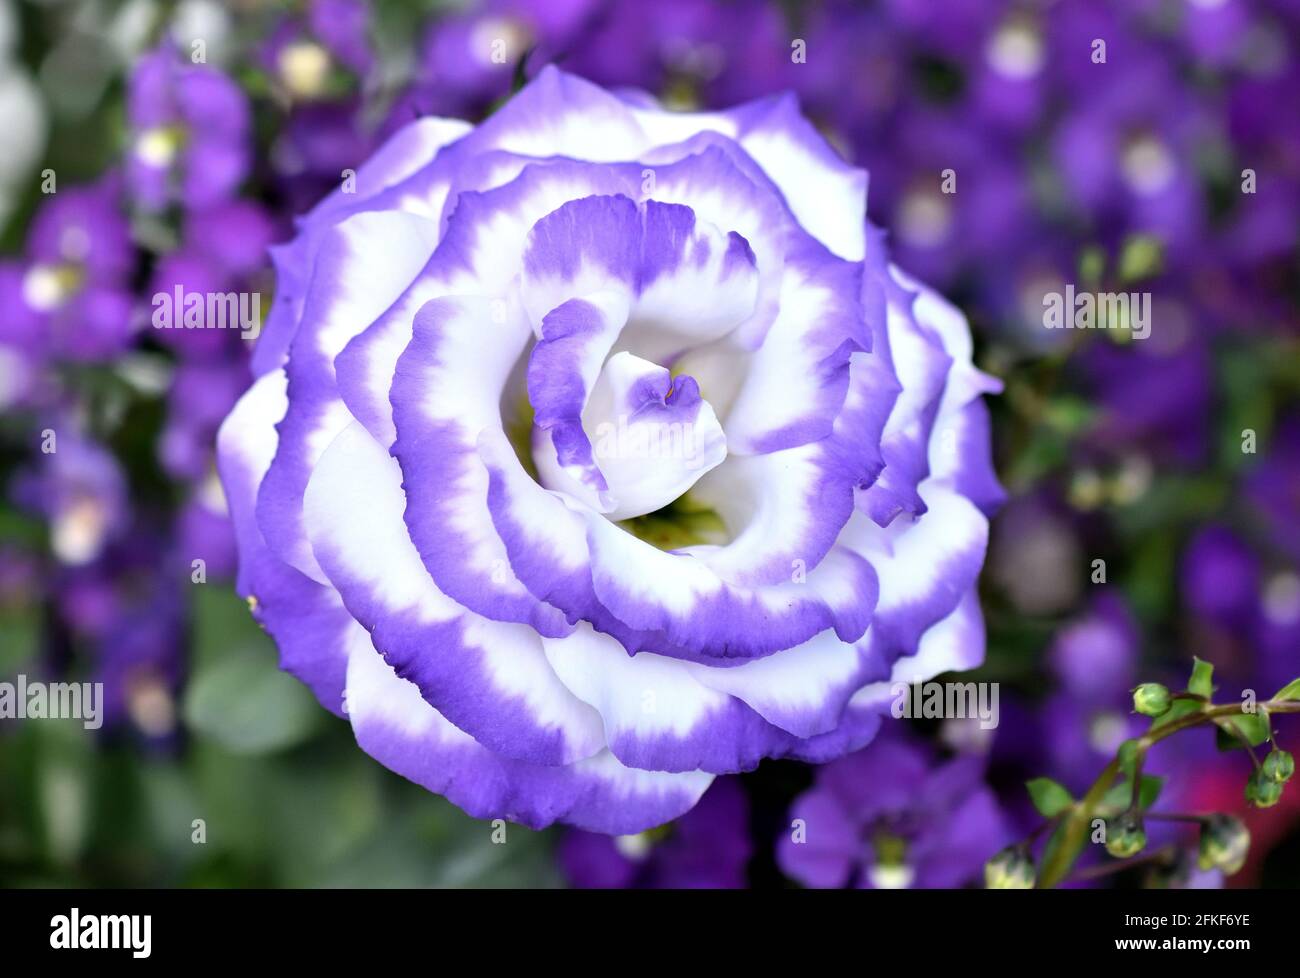 Close up of a single purple-tipped white petal Lisianthus flower on a  purple floral background Stock Photo - Alamy